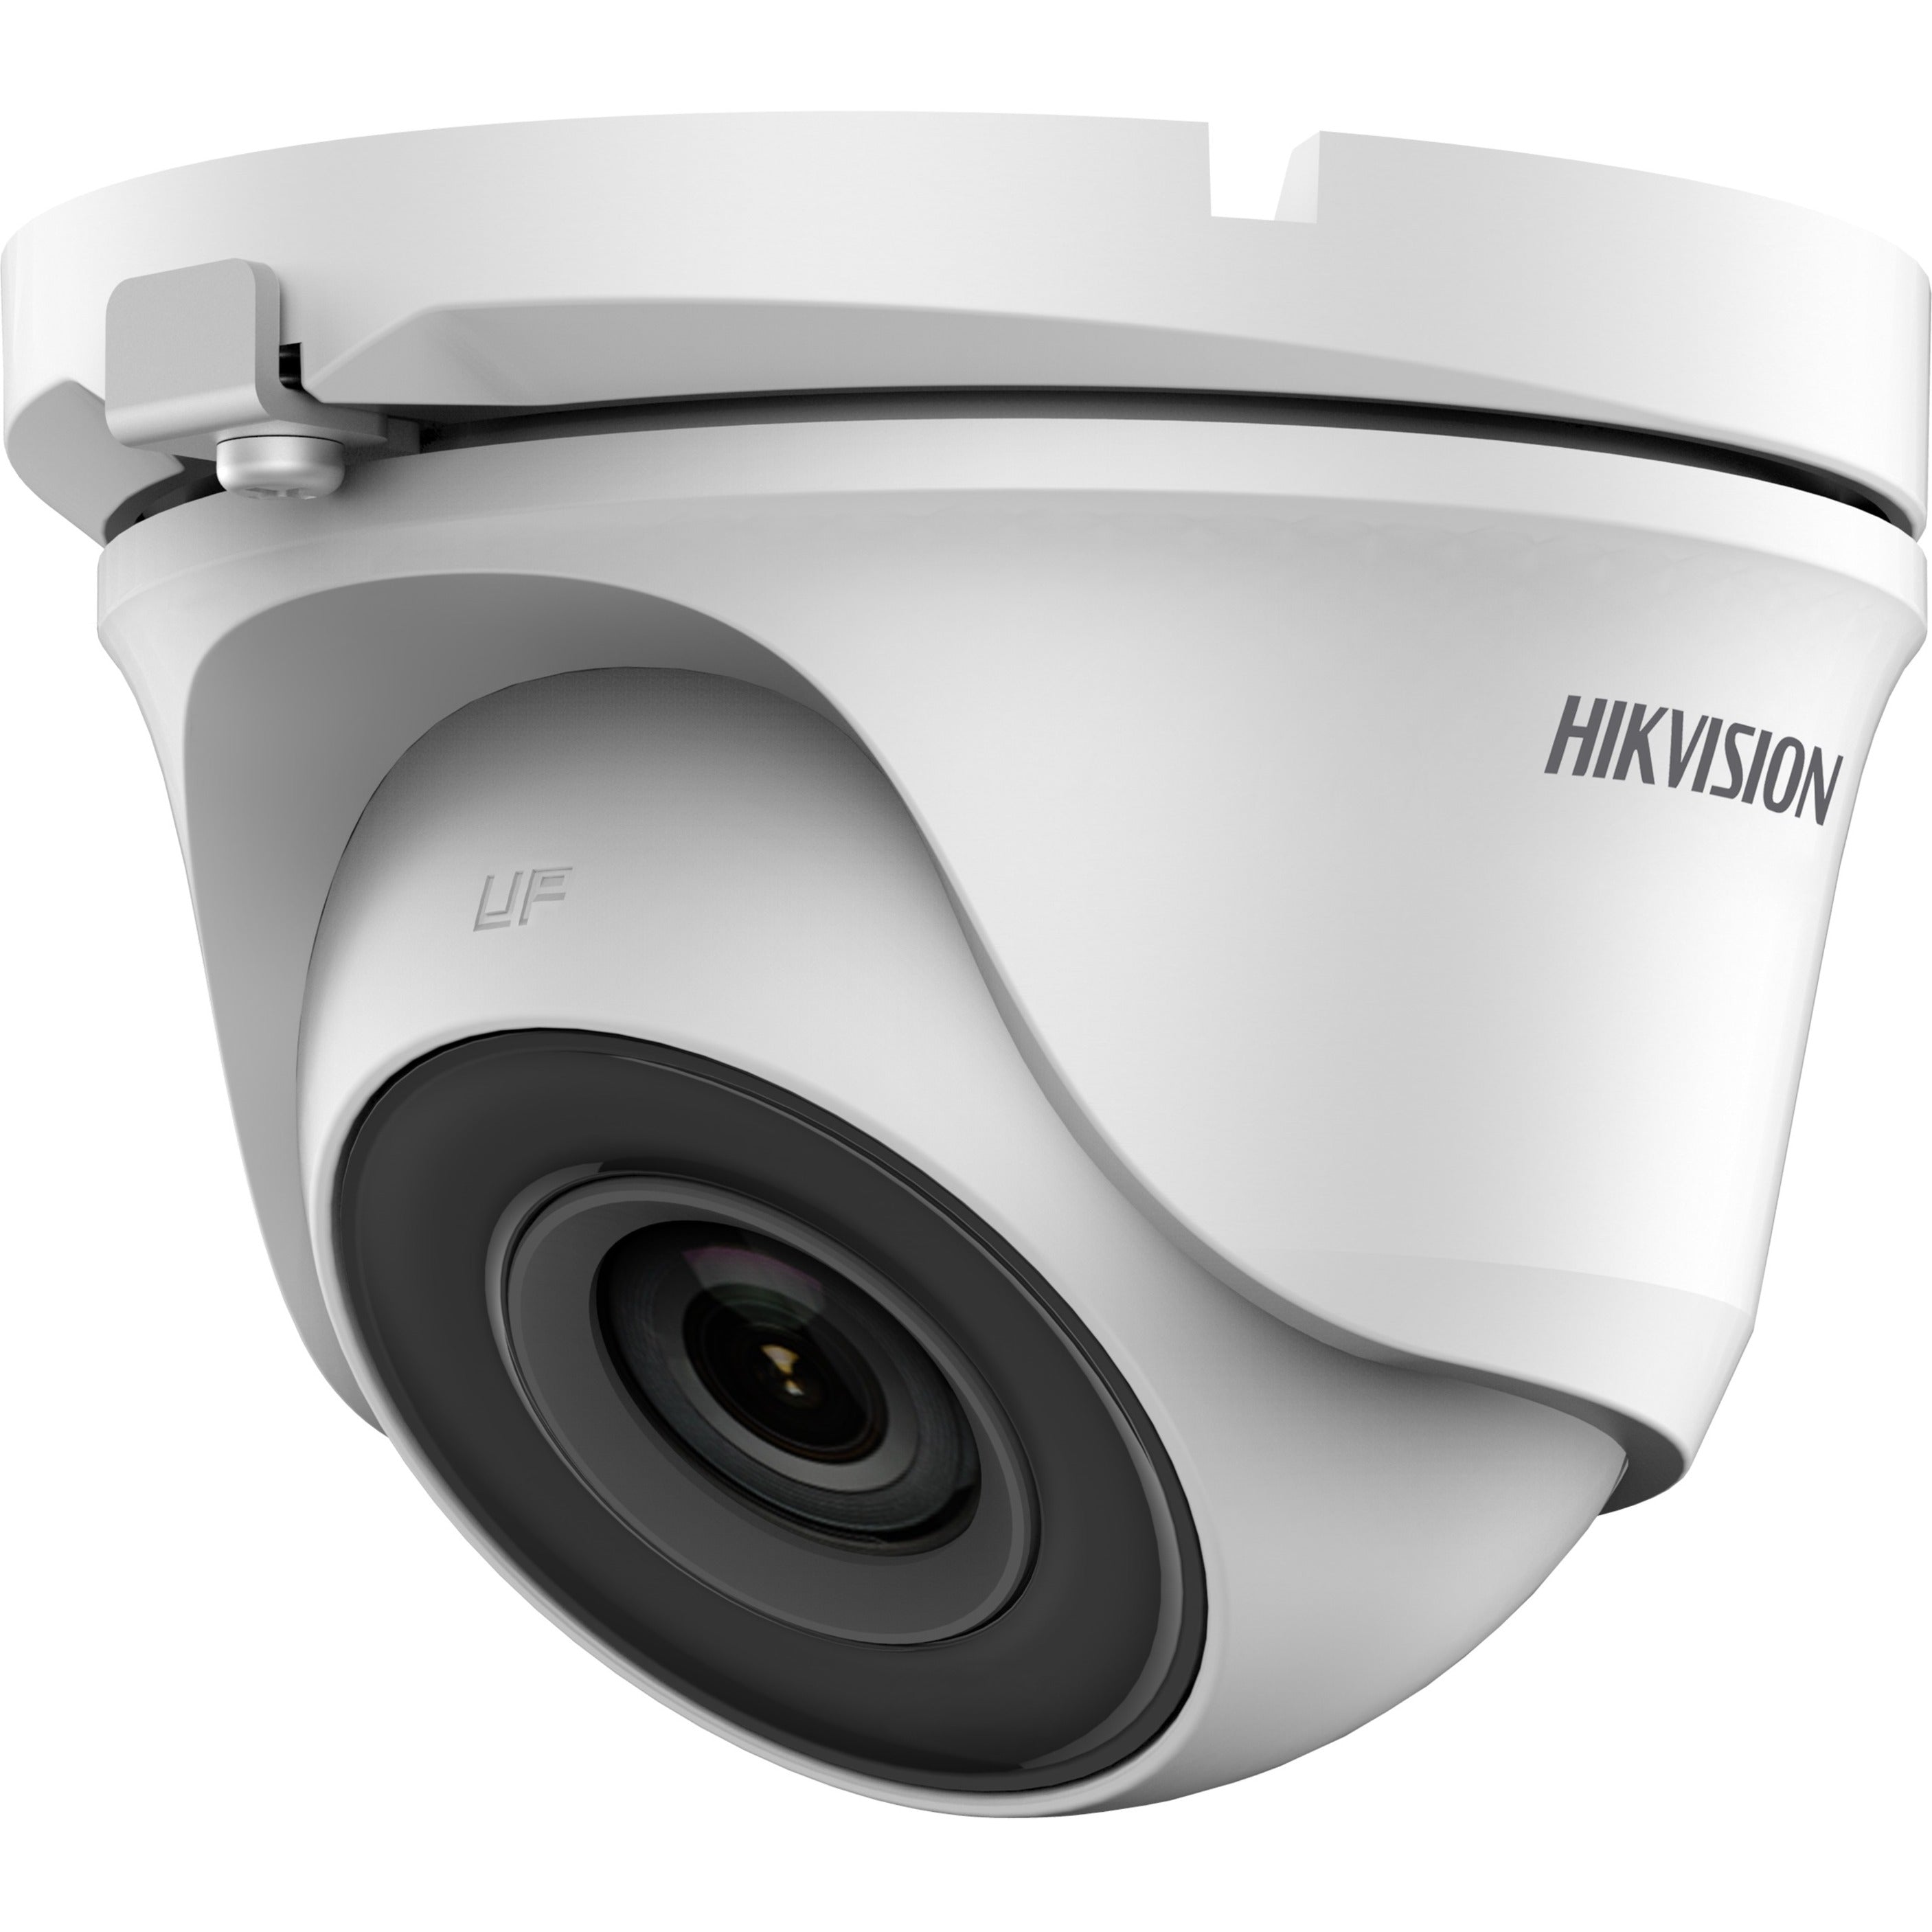 Hikvision ECT-T12F3 2 MP Outdoor EXIR Turret Camera, Full HD, 3.6mm Lens, IP66 Weather Resistant